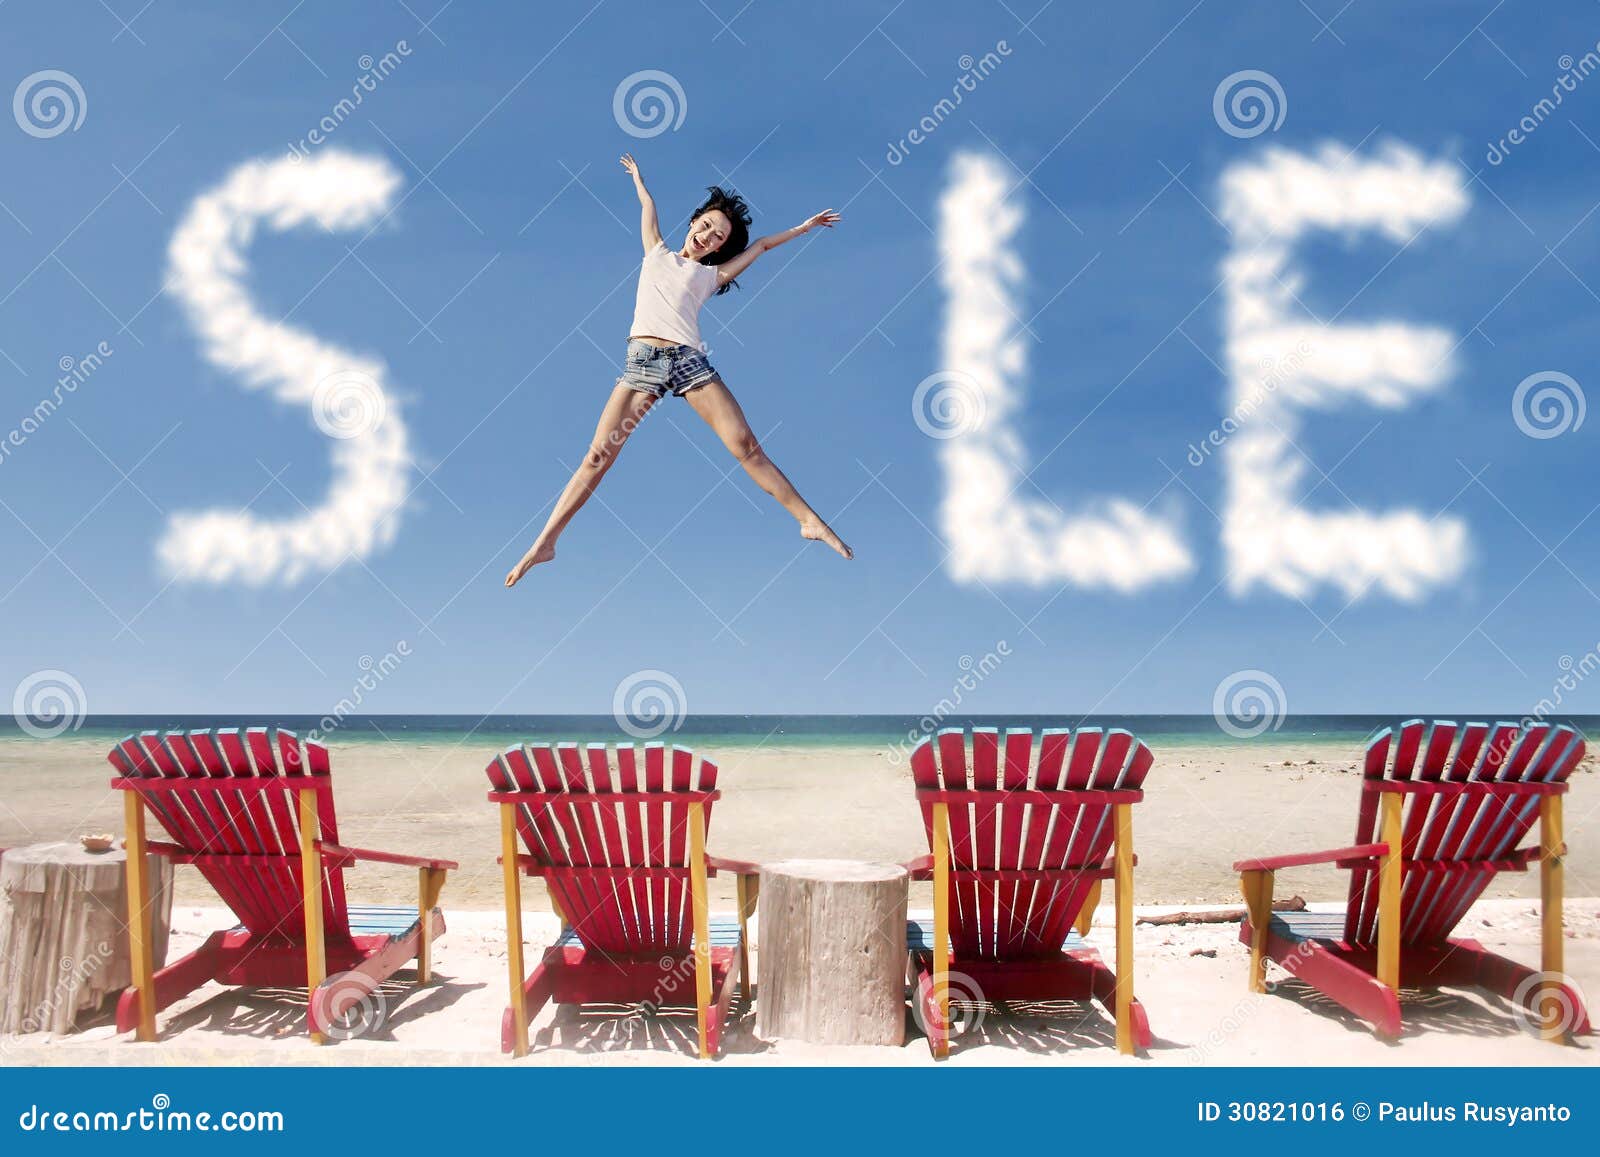  Stock Image: Advertising sale cloud and girl jump over beach chairs